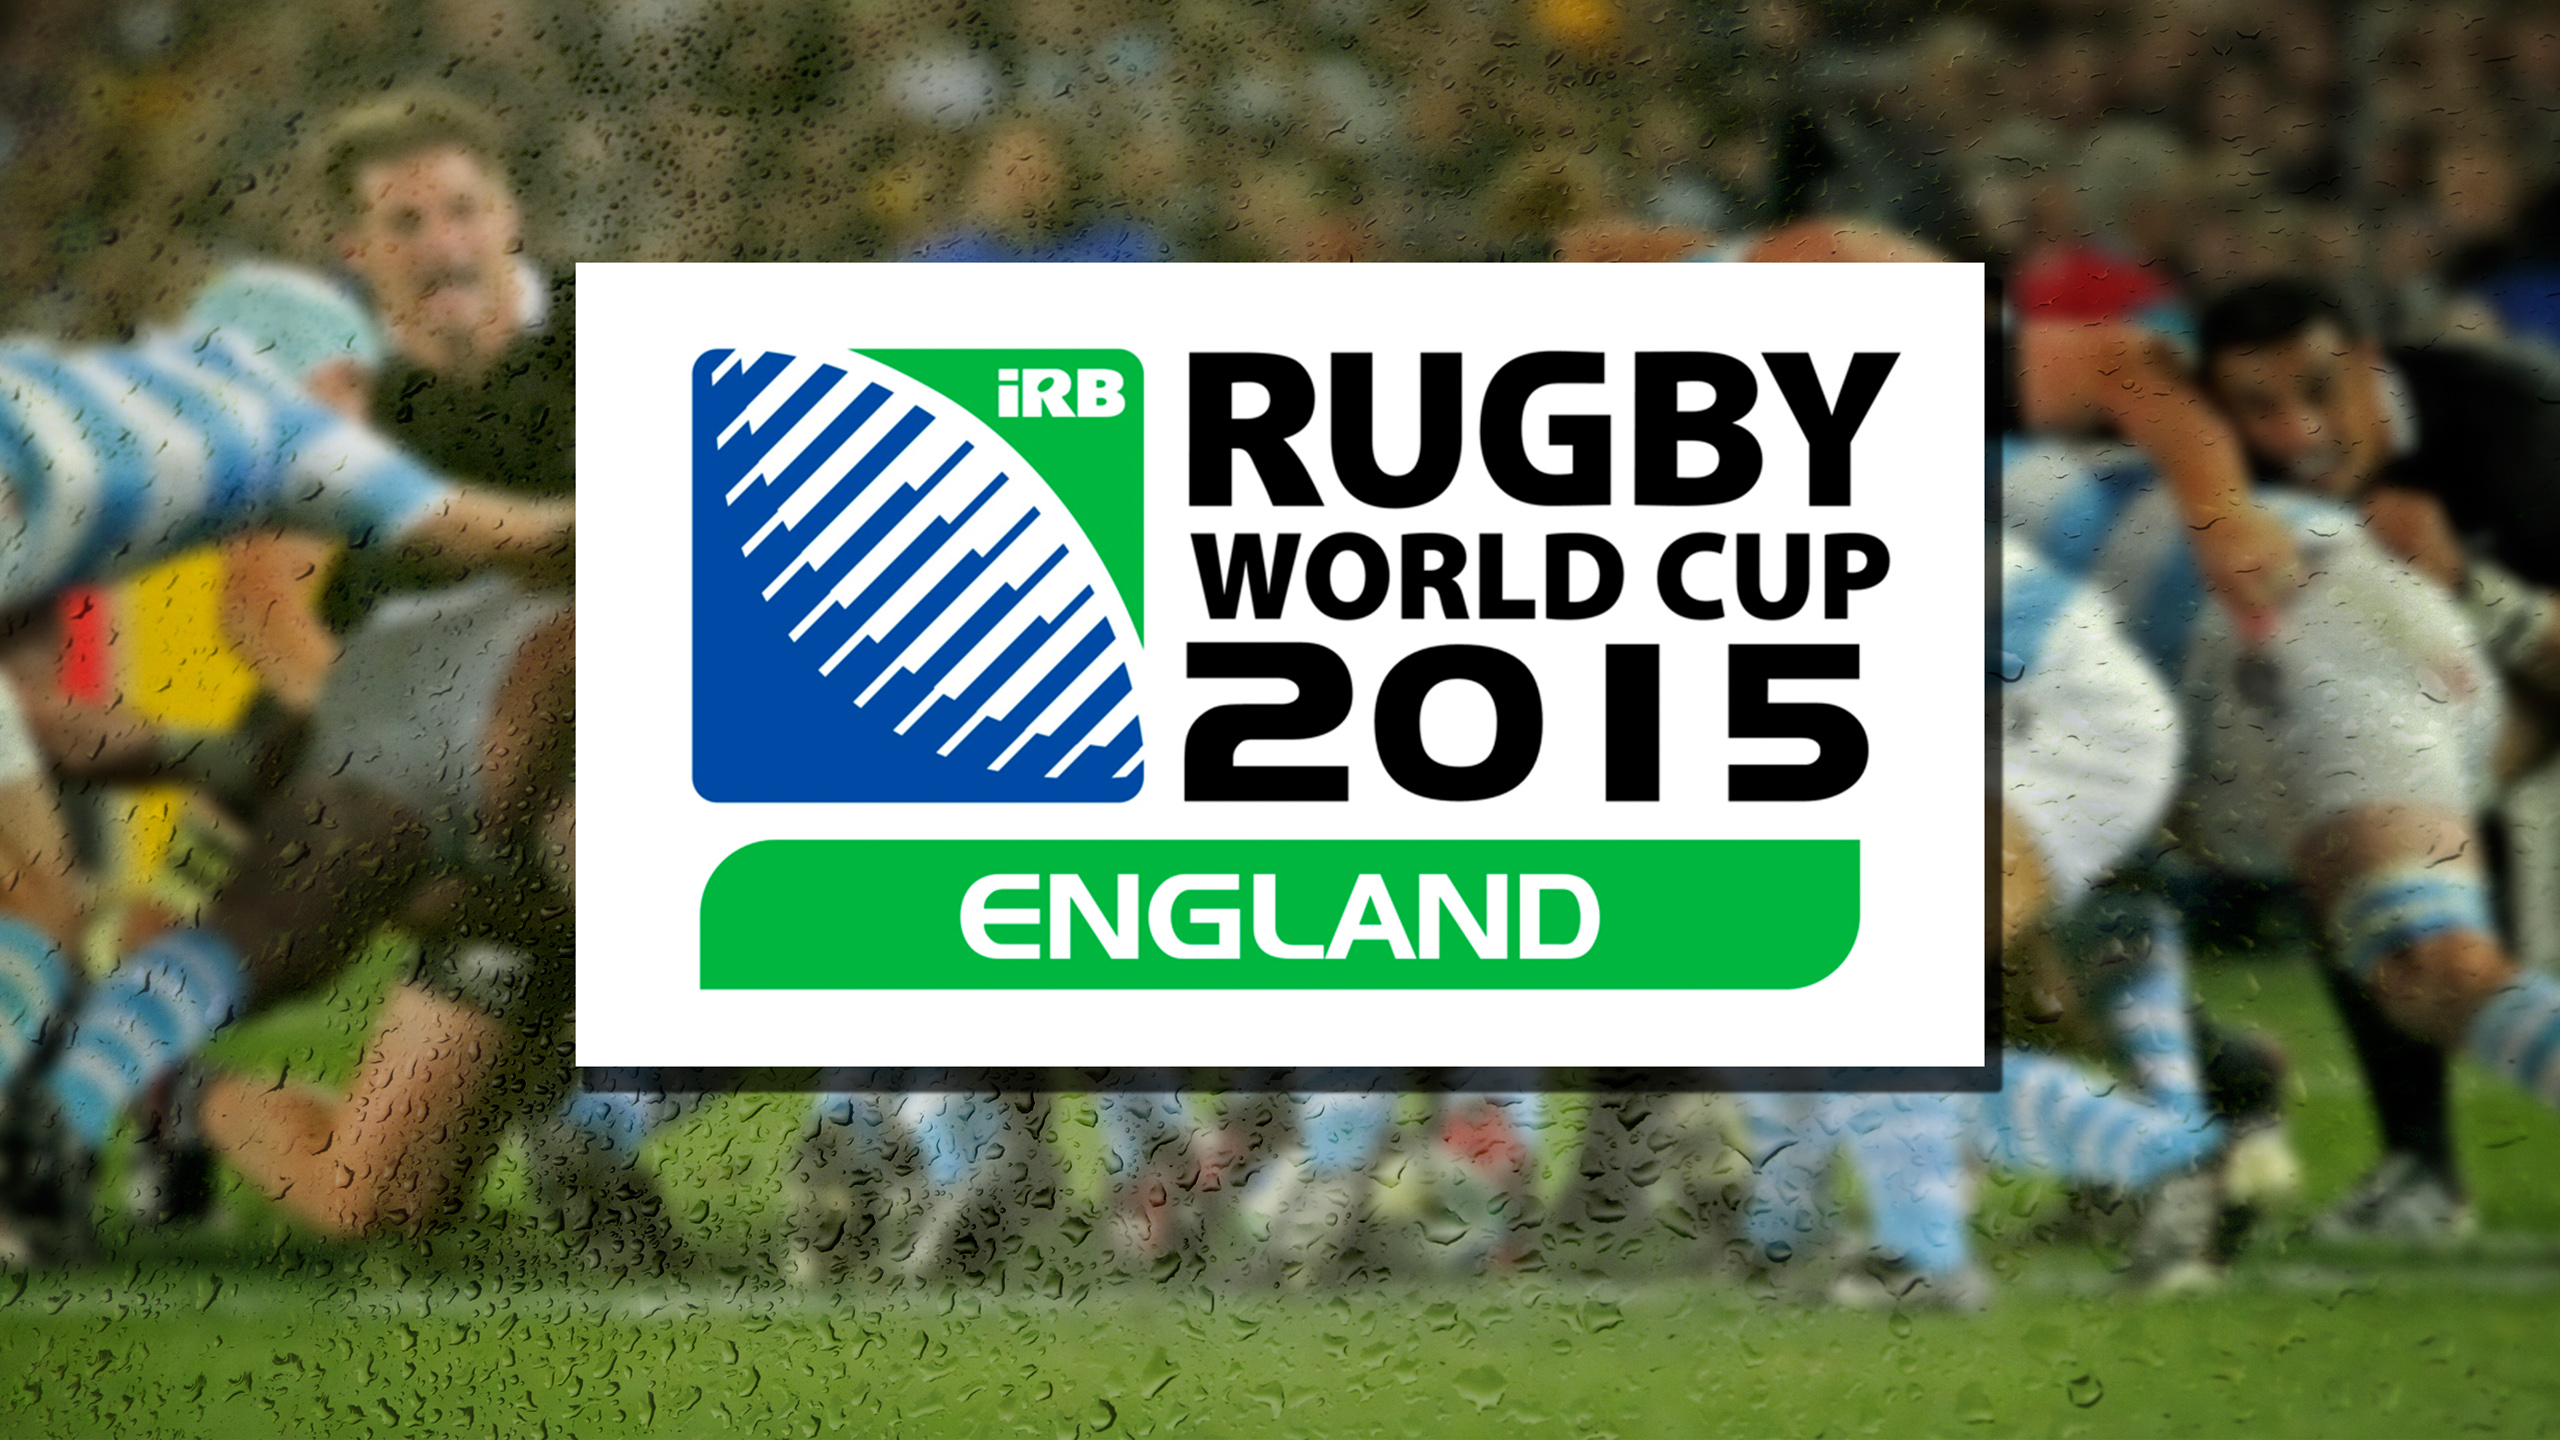 Rugby World Cup 2015 HD Wallpaper